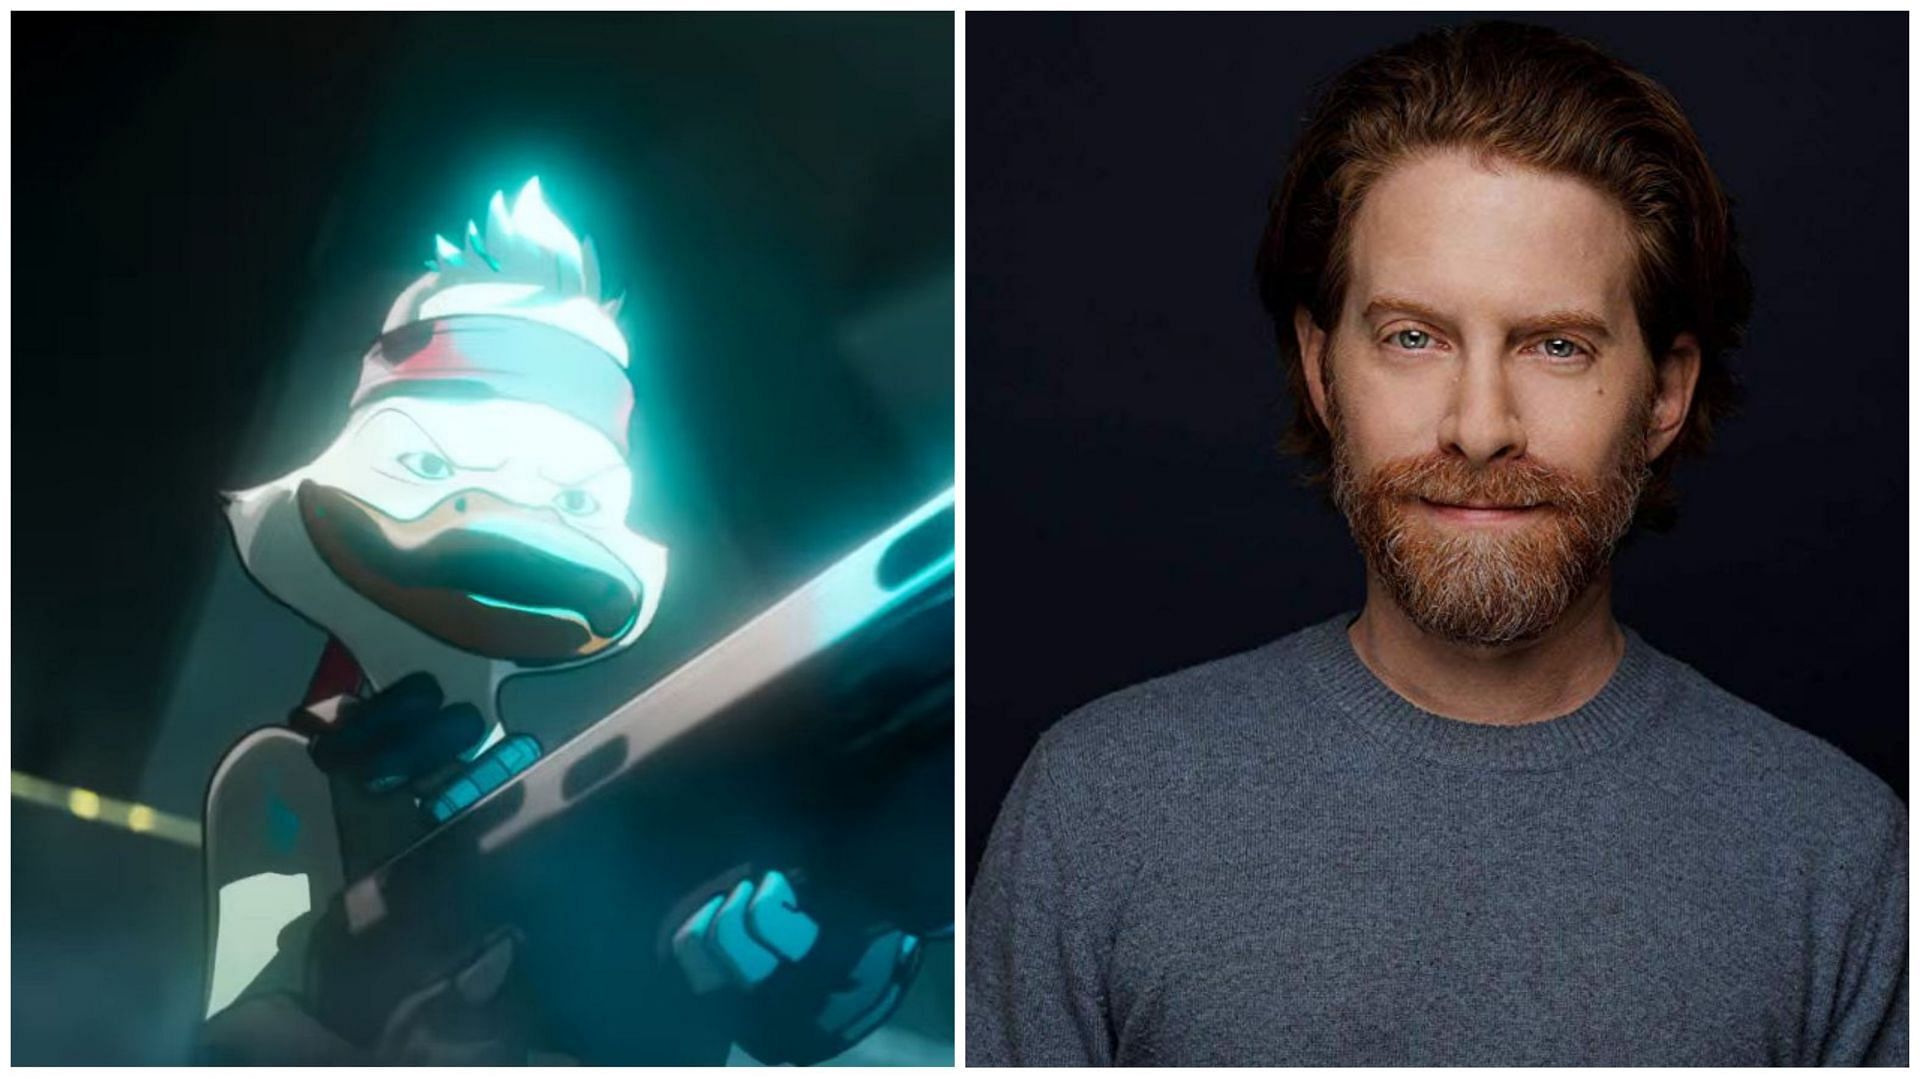 Seth Green Plays Howard the Duck in MCU (Images via Marvel Studios and IMDb)